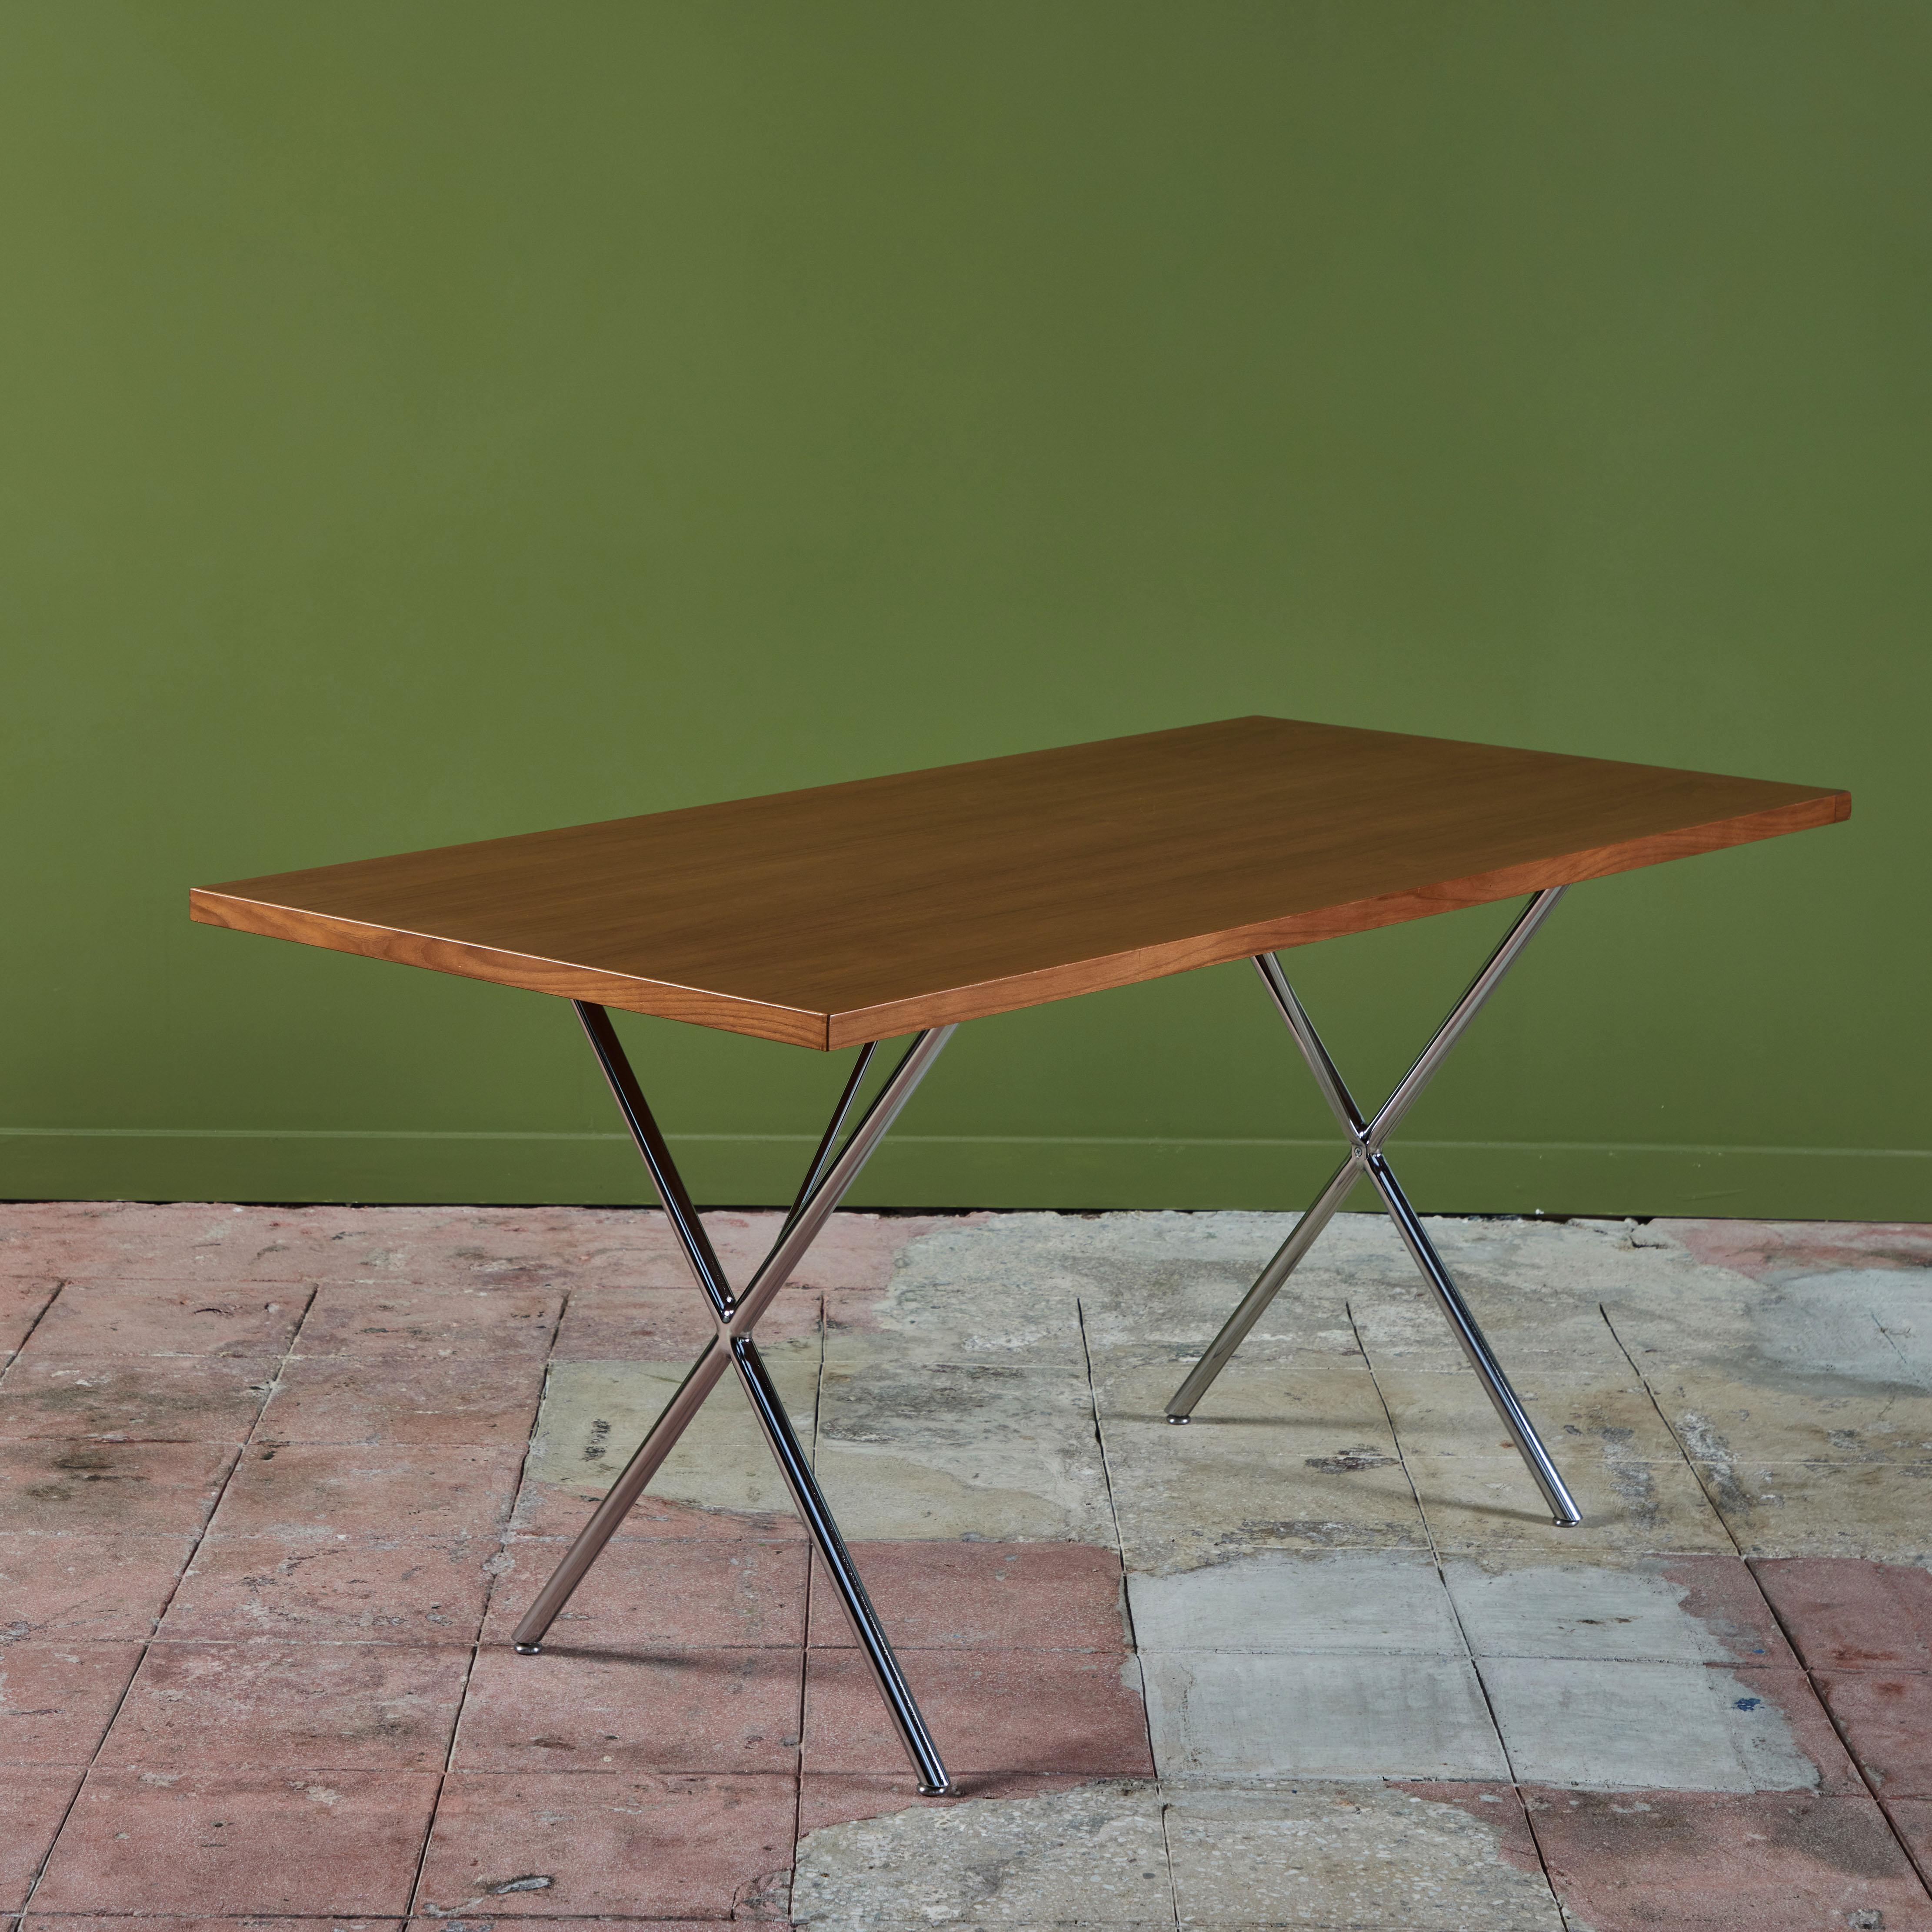 George Nelson X-Leg Table for Herman Miller. Originally designed and produced in the 1950s this was made as a work table for an office but equally intended for a dining space as well. The table features a walnut table top and chrome legs that cross